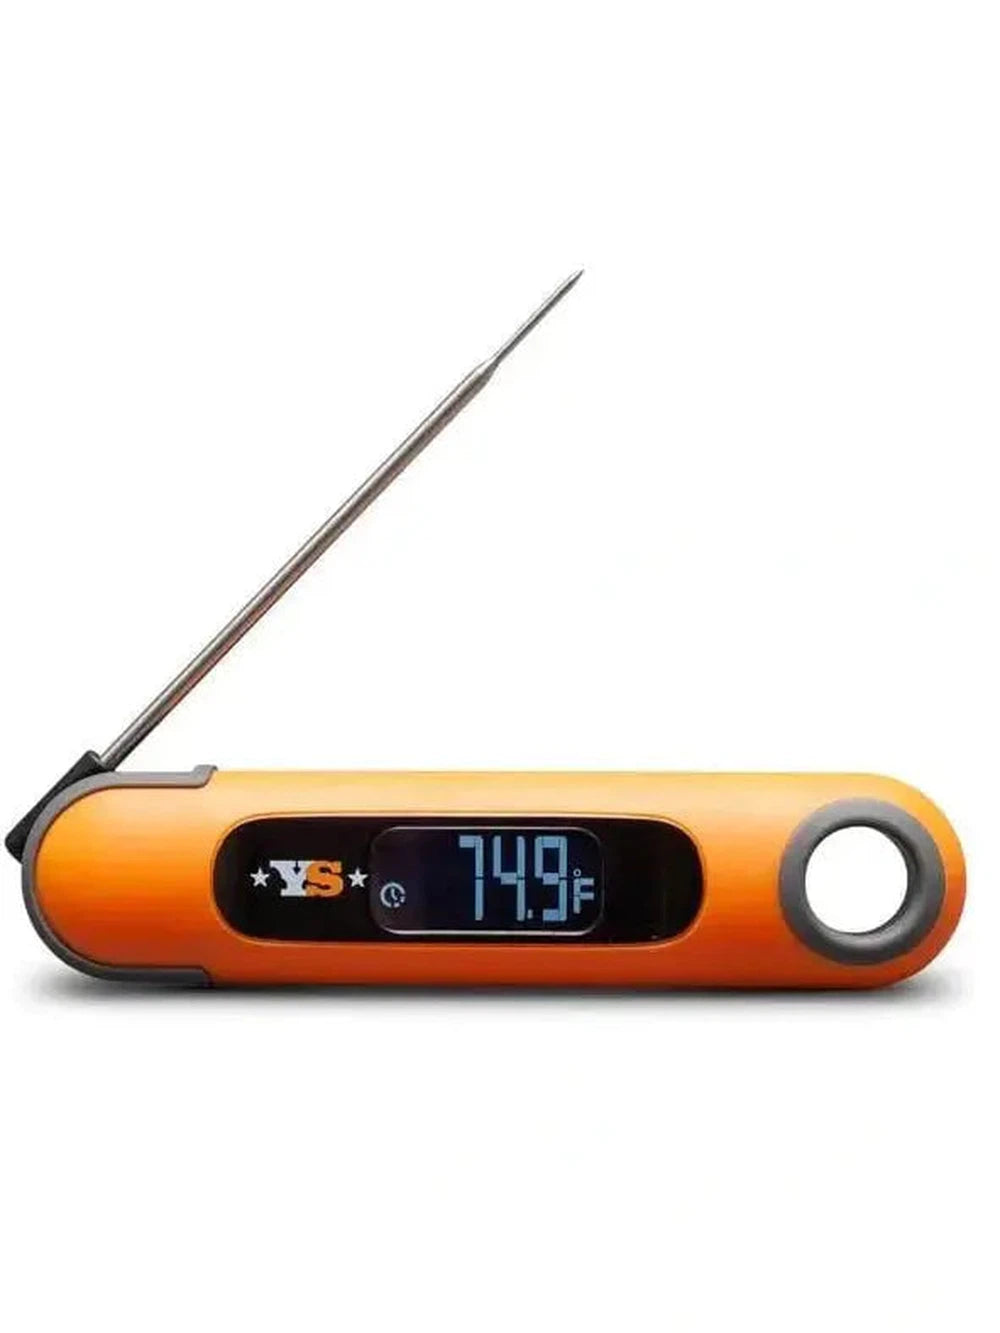 Yoder Smokers 1060-03 Instant-Read Thermometer Yoder Smokers Chilliwack BBQ Supply